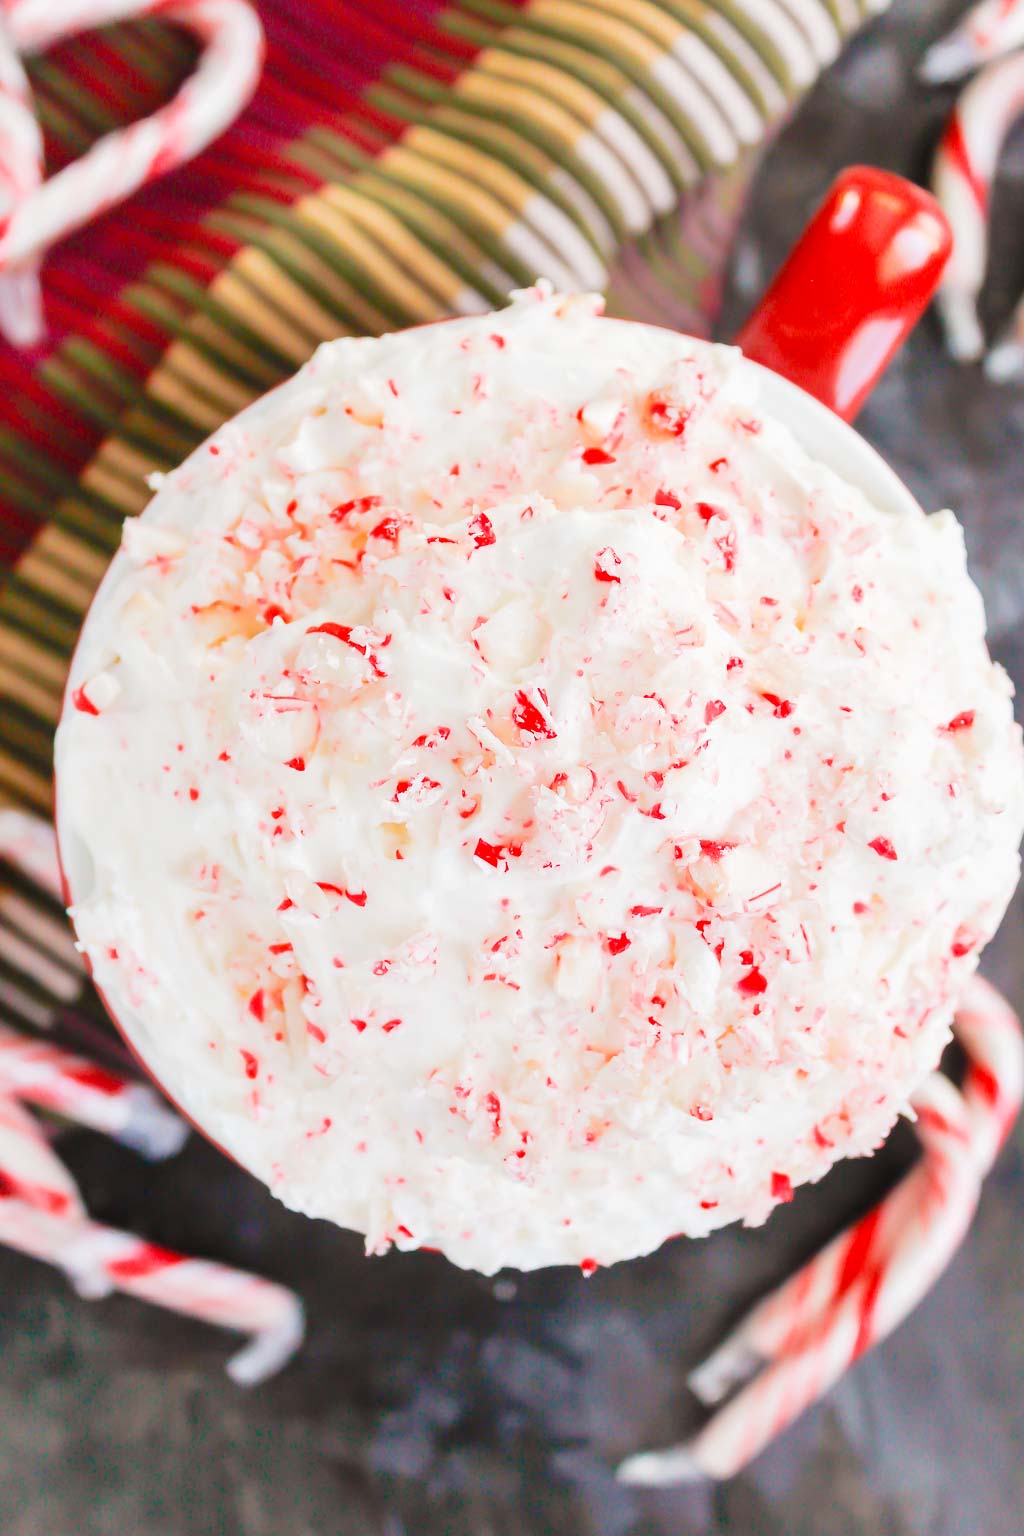 You're going to fall in love with how easy and delicious this Peppermint Cheesecake Dip recipe is to make. Itâ€™s a bright and refreshing dessert option for your holiday table. This treat mixes up in minutes and will be a hit with everyone! #peppermint #peppermintdip #peppermintcheesecake #peppermintcheesecakedip #candycanedip #dessert #christmasdessert #holidaydessert